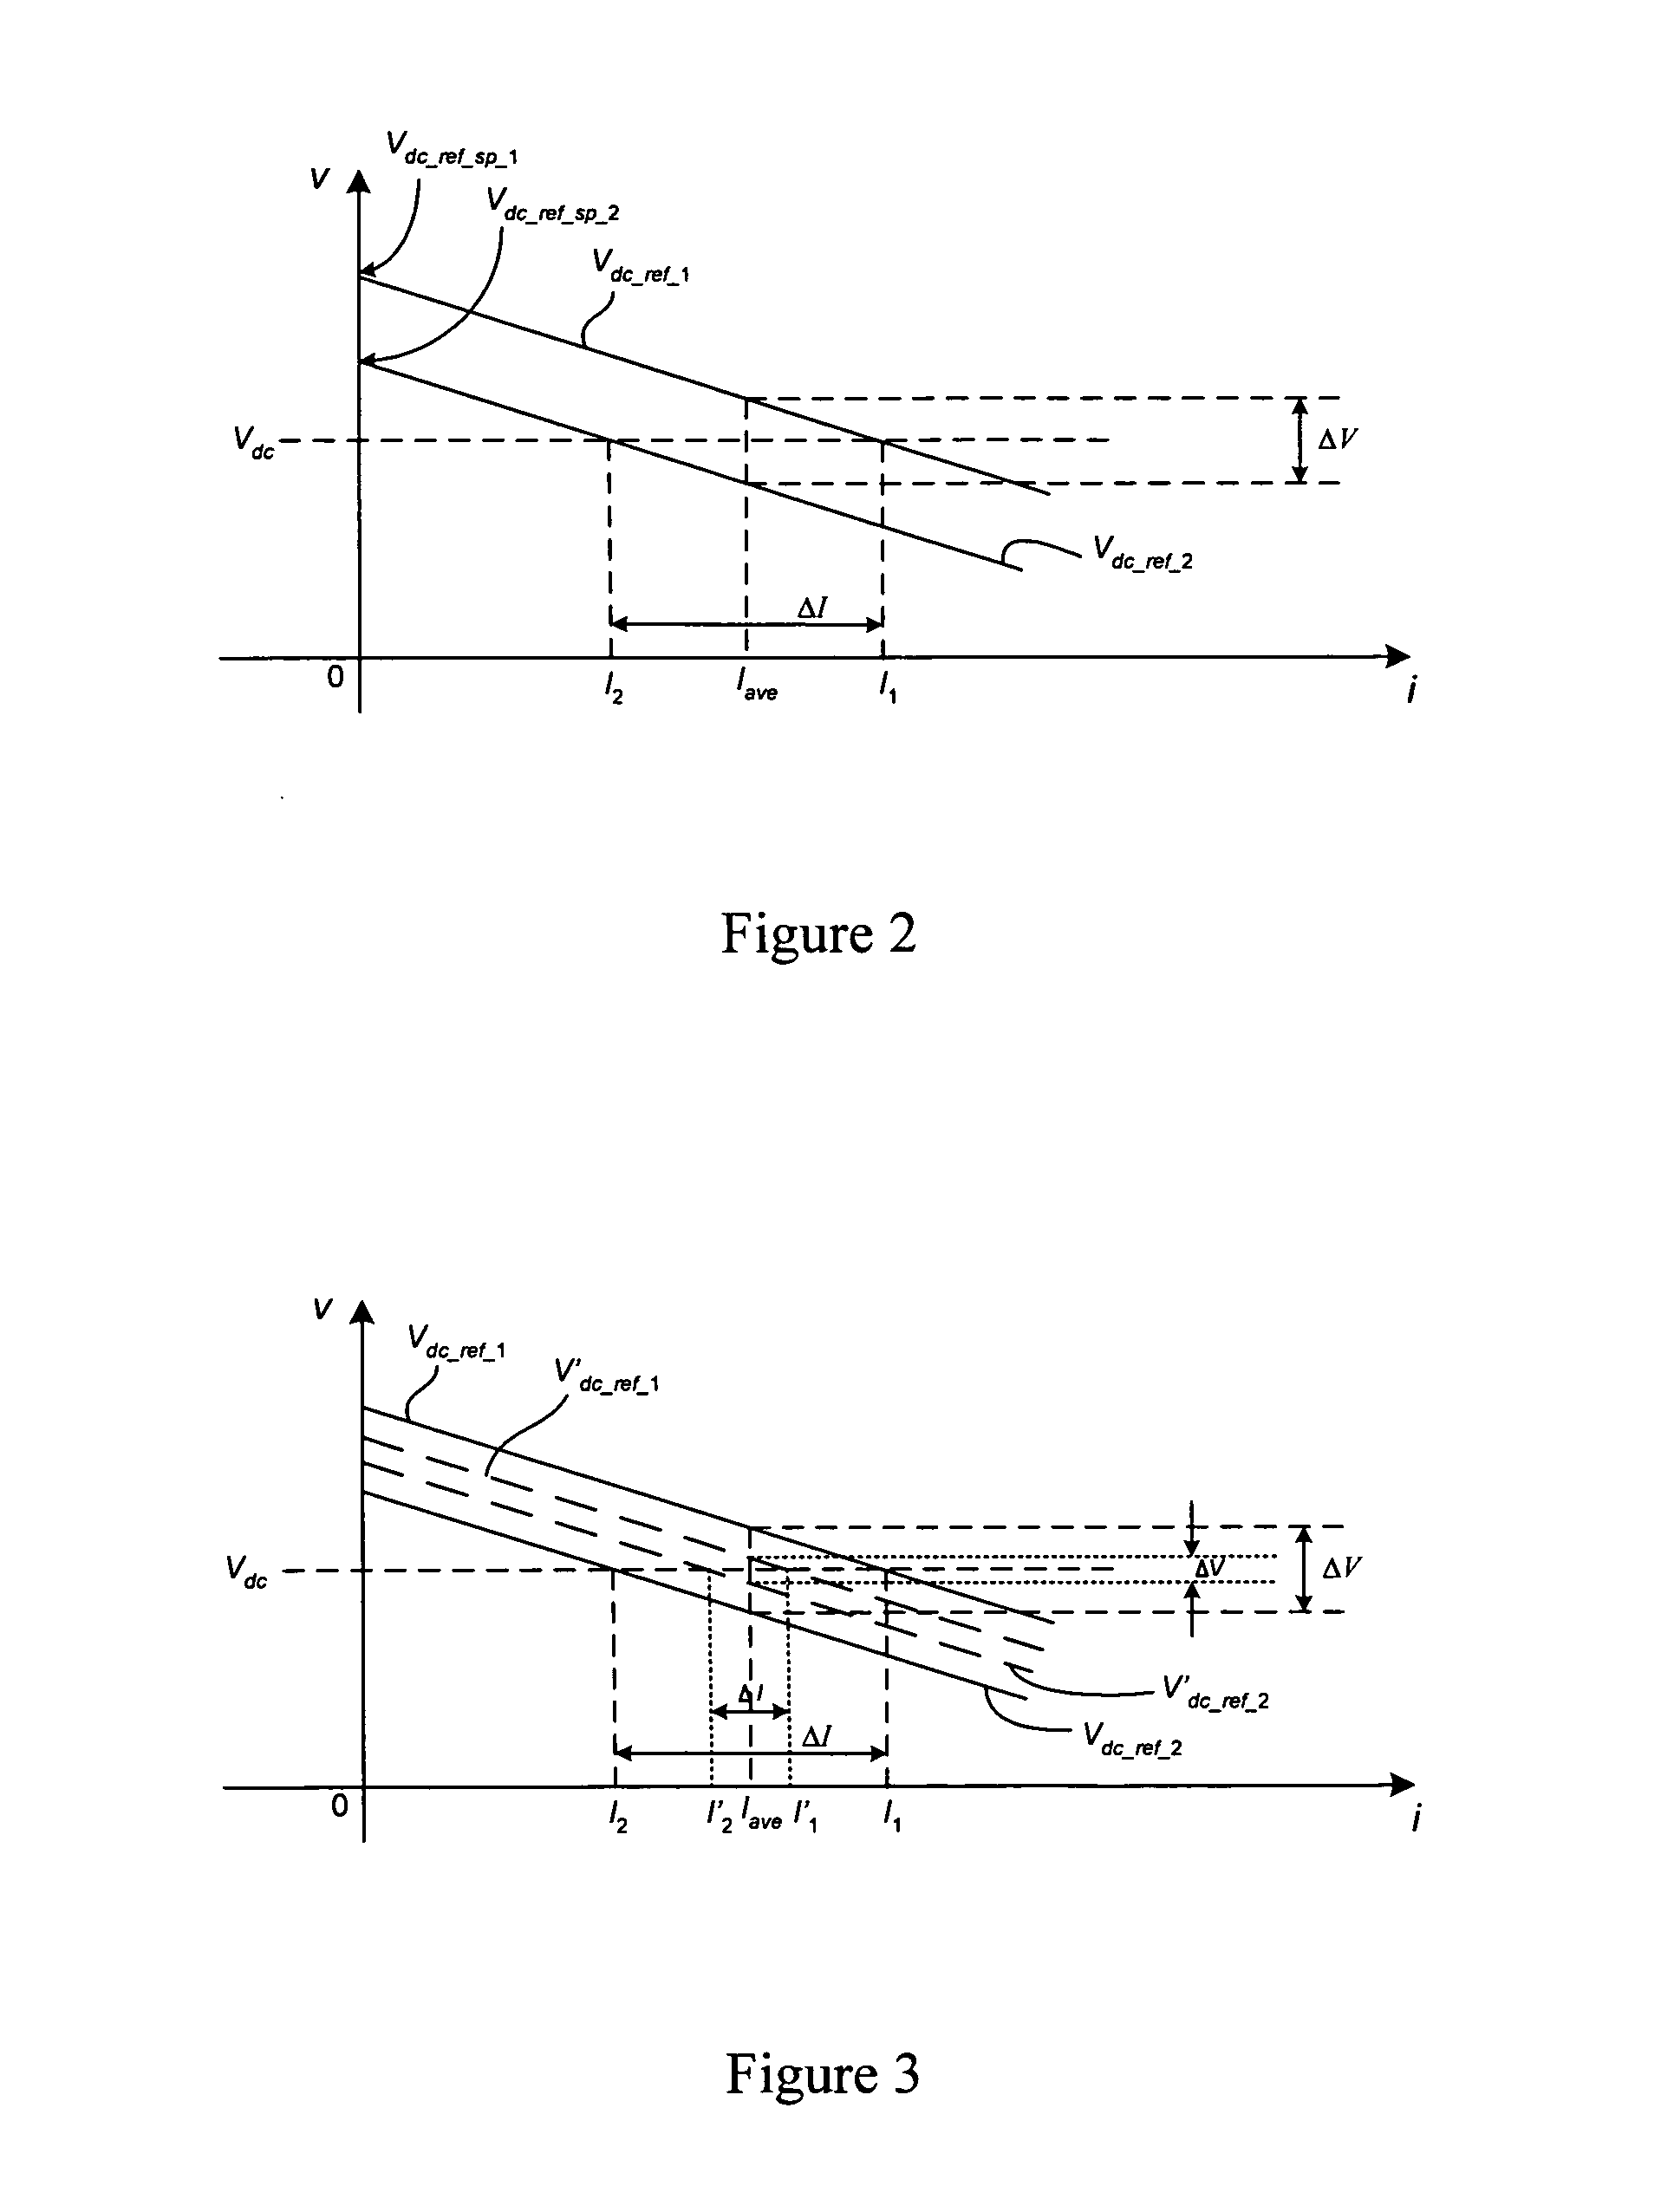 Control Methods for Parallel-Connected Power Converters